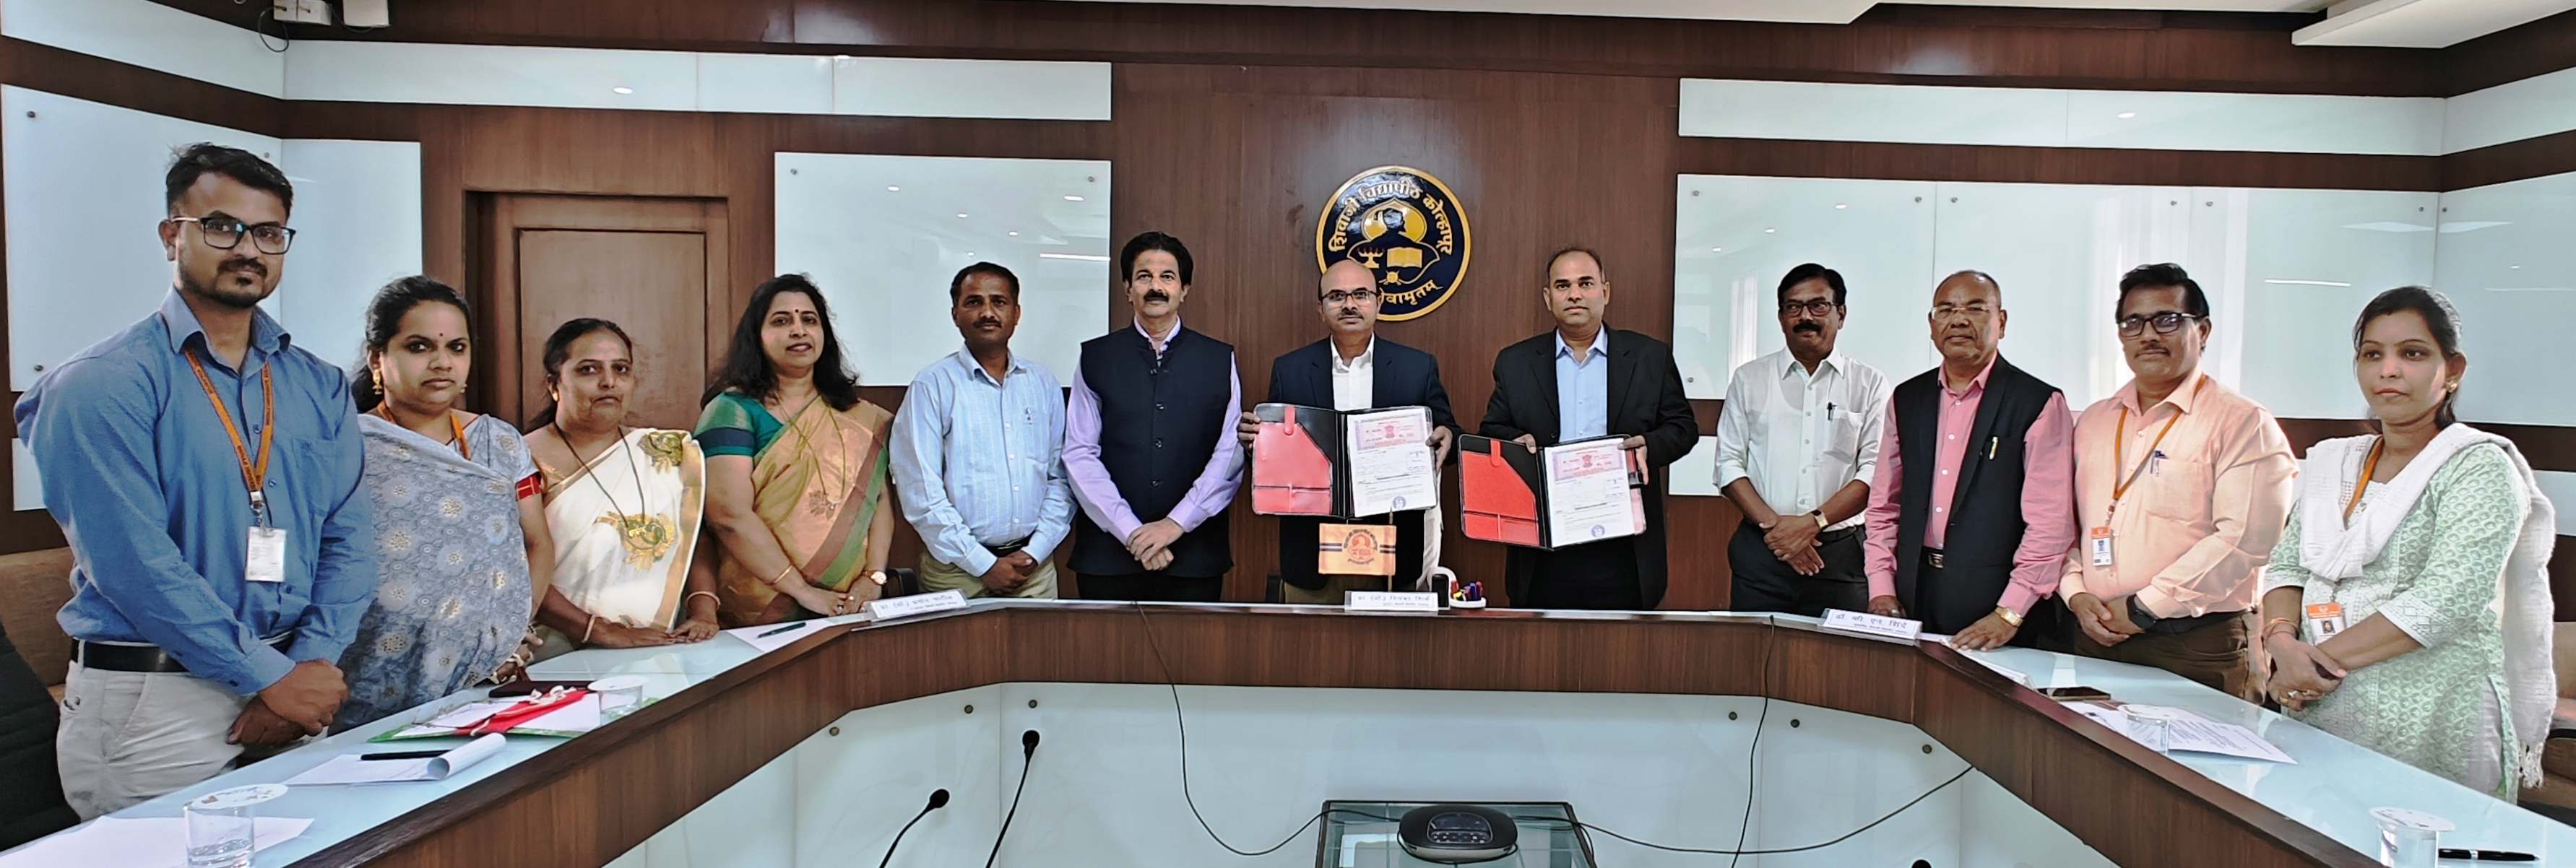 MoU of Shivaji University with Gokhale Institute  Agreement urging participation in policy-making activities